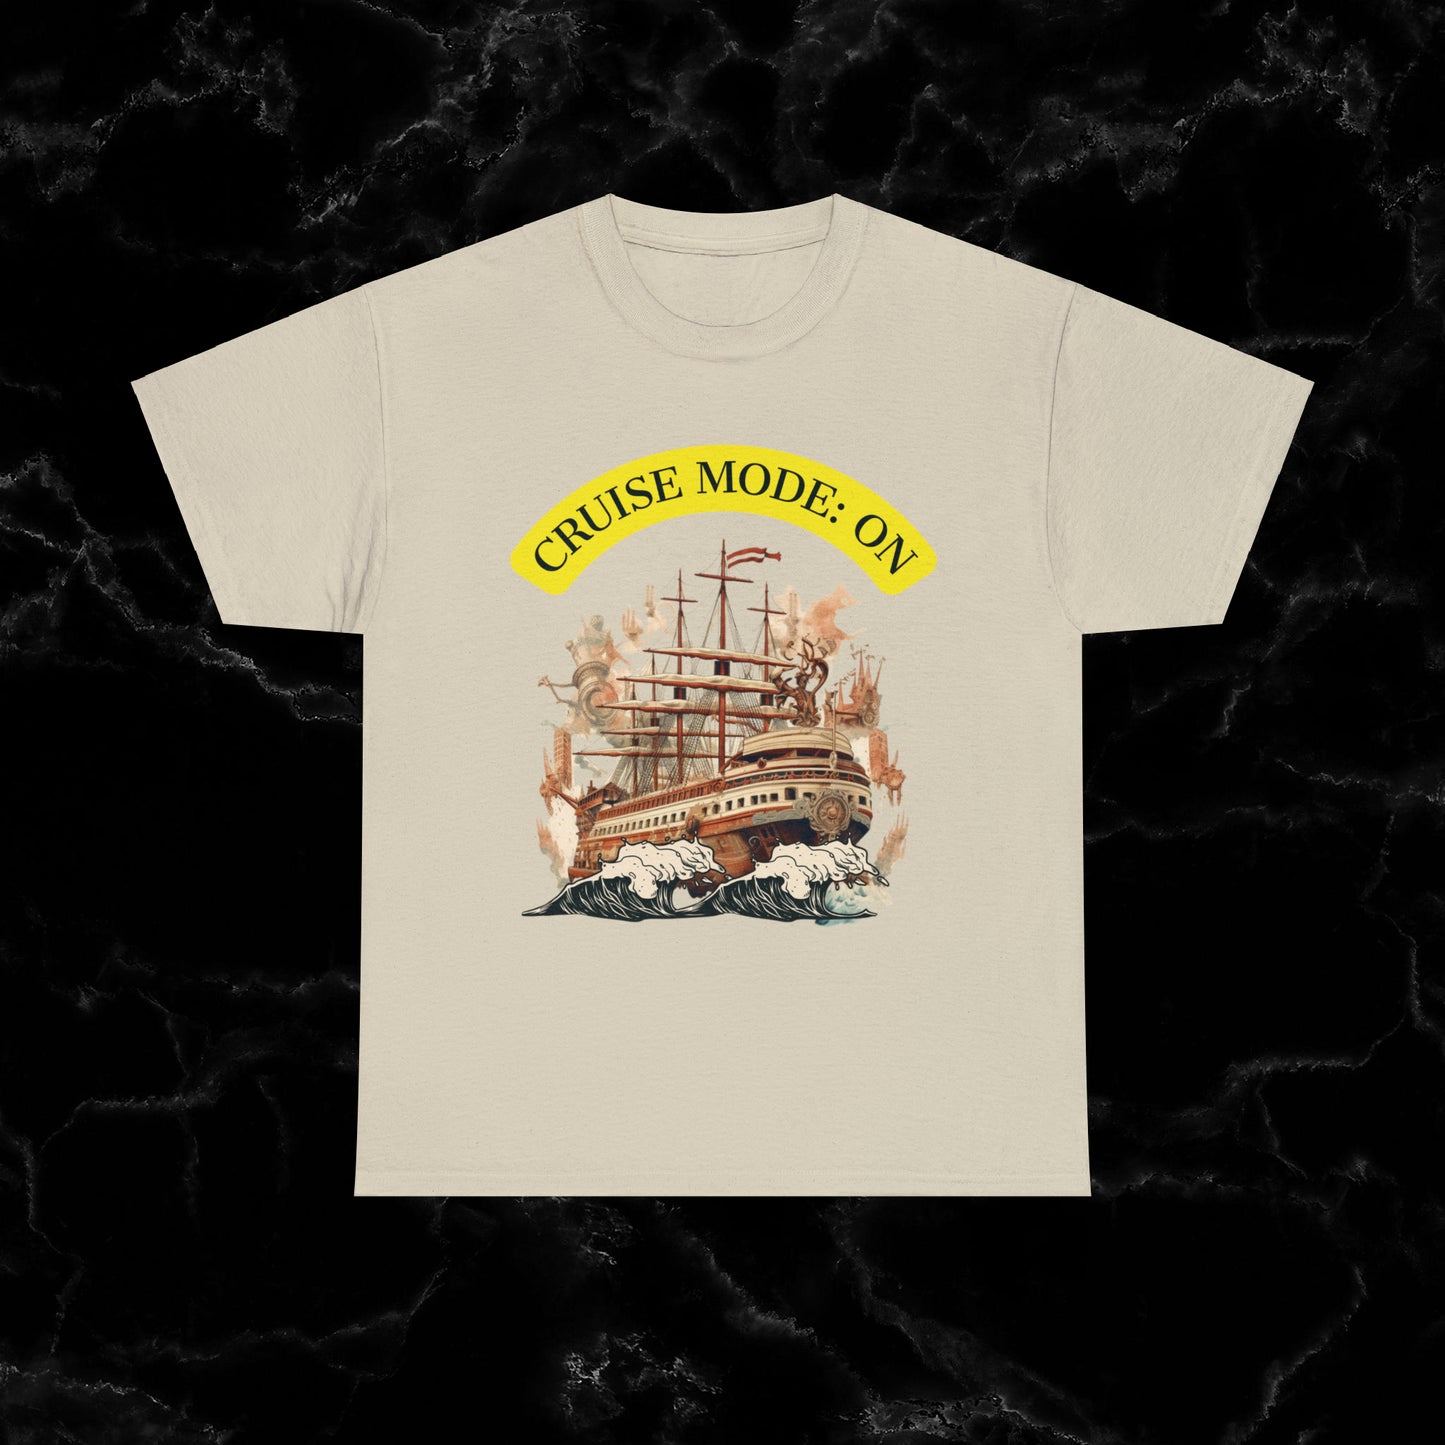 Sail in Style with our Viking Cruise T-Shirt – Cruise Time On, Cruise Mode Activated! T-Shirt Sand S 